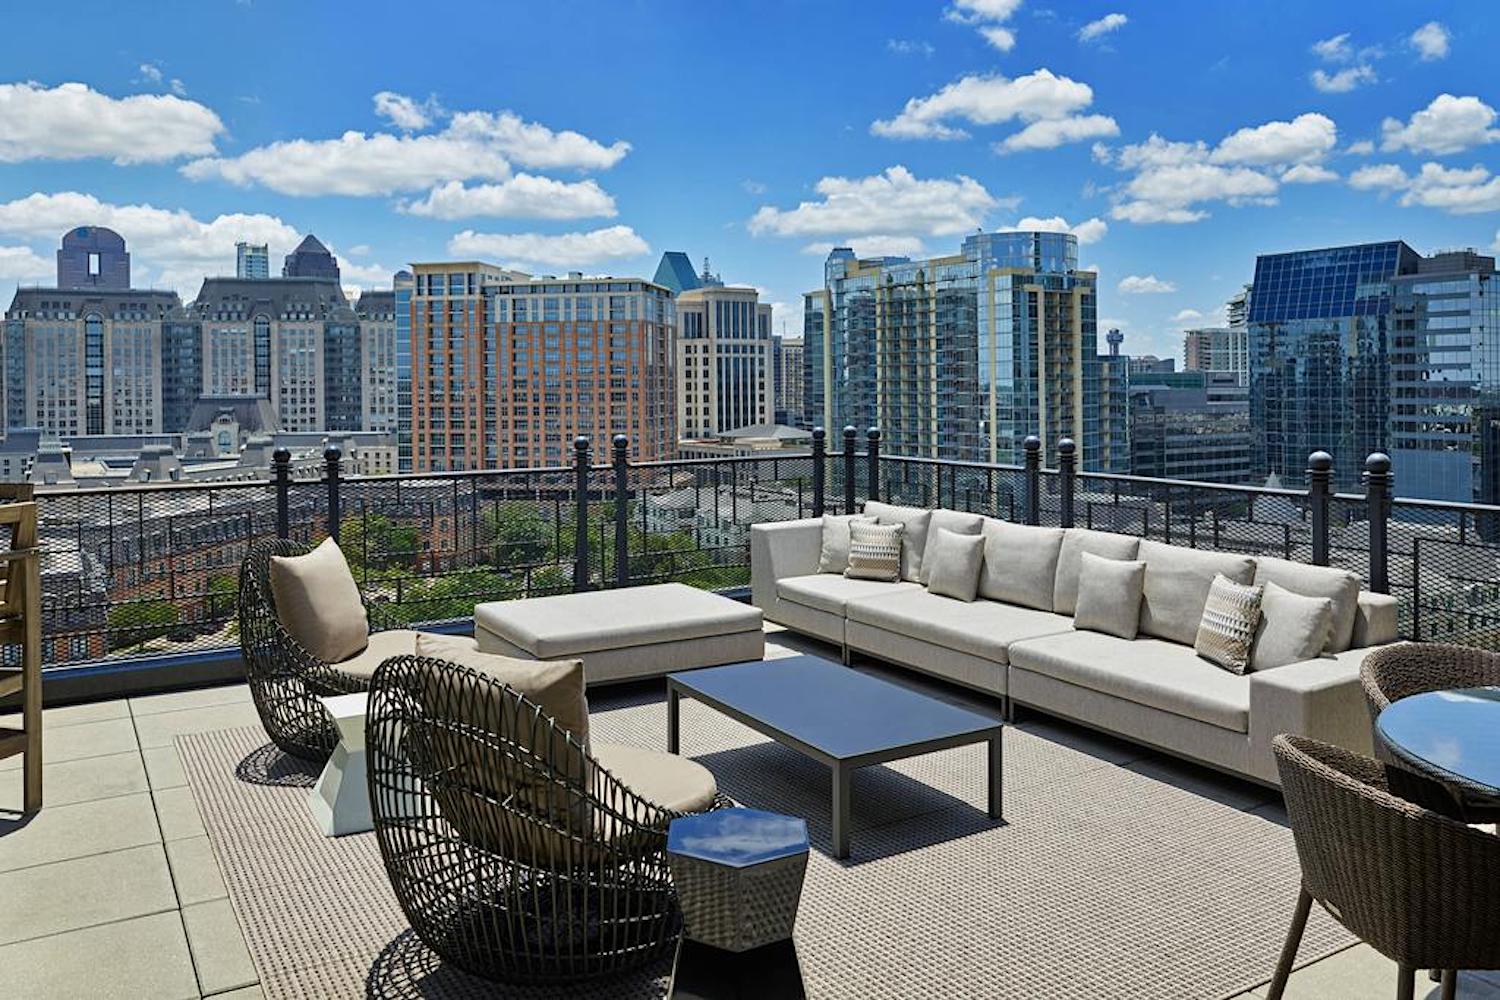 a rooftop deck with couches and tables overlooking a city.